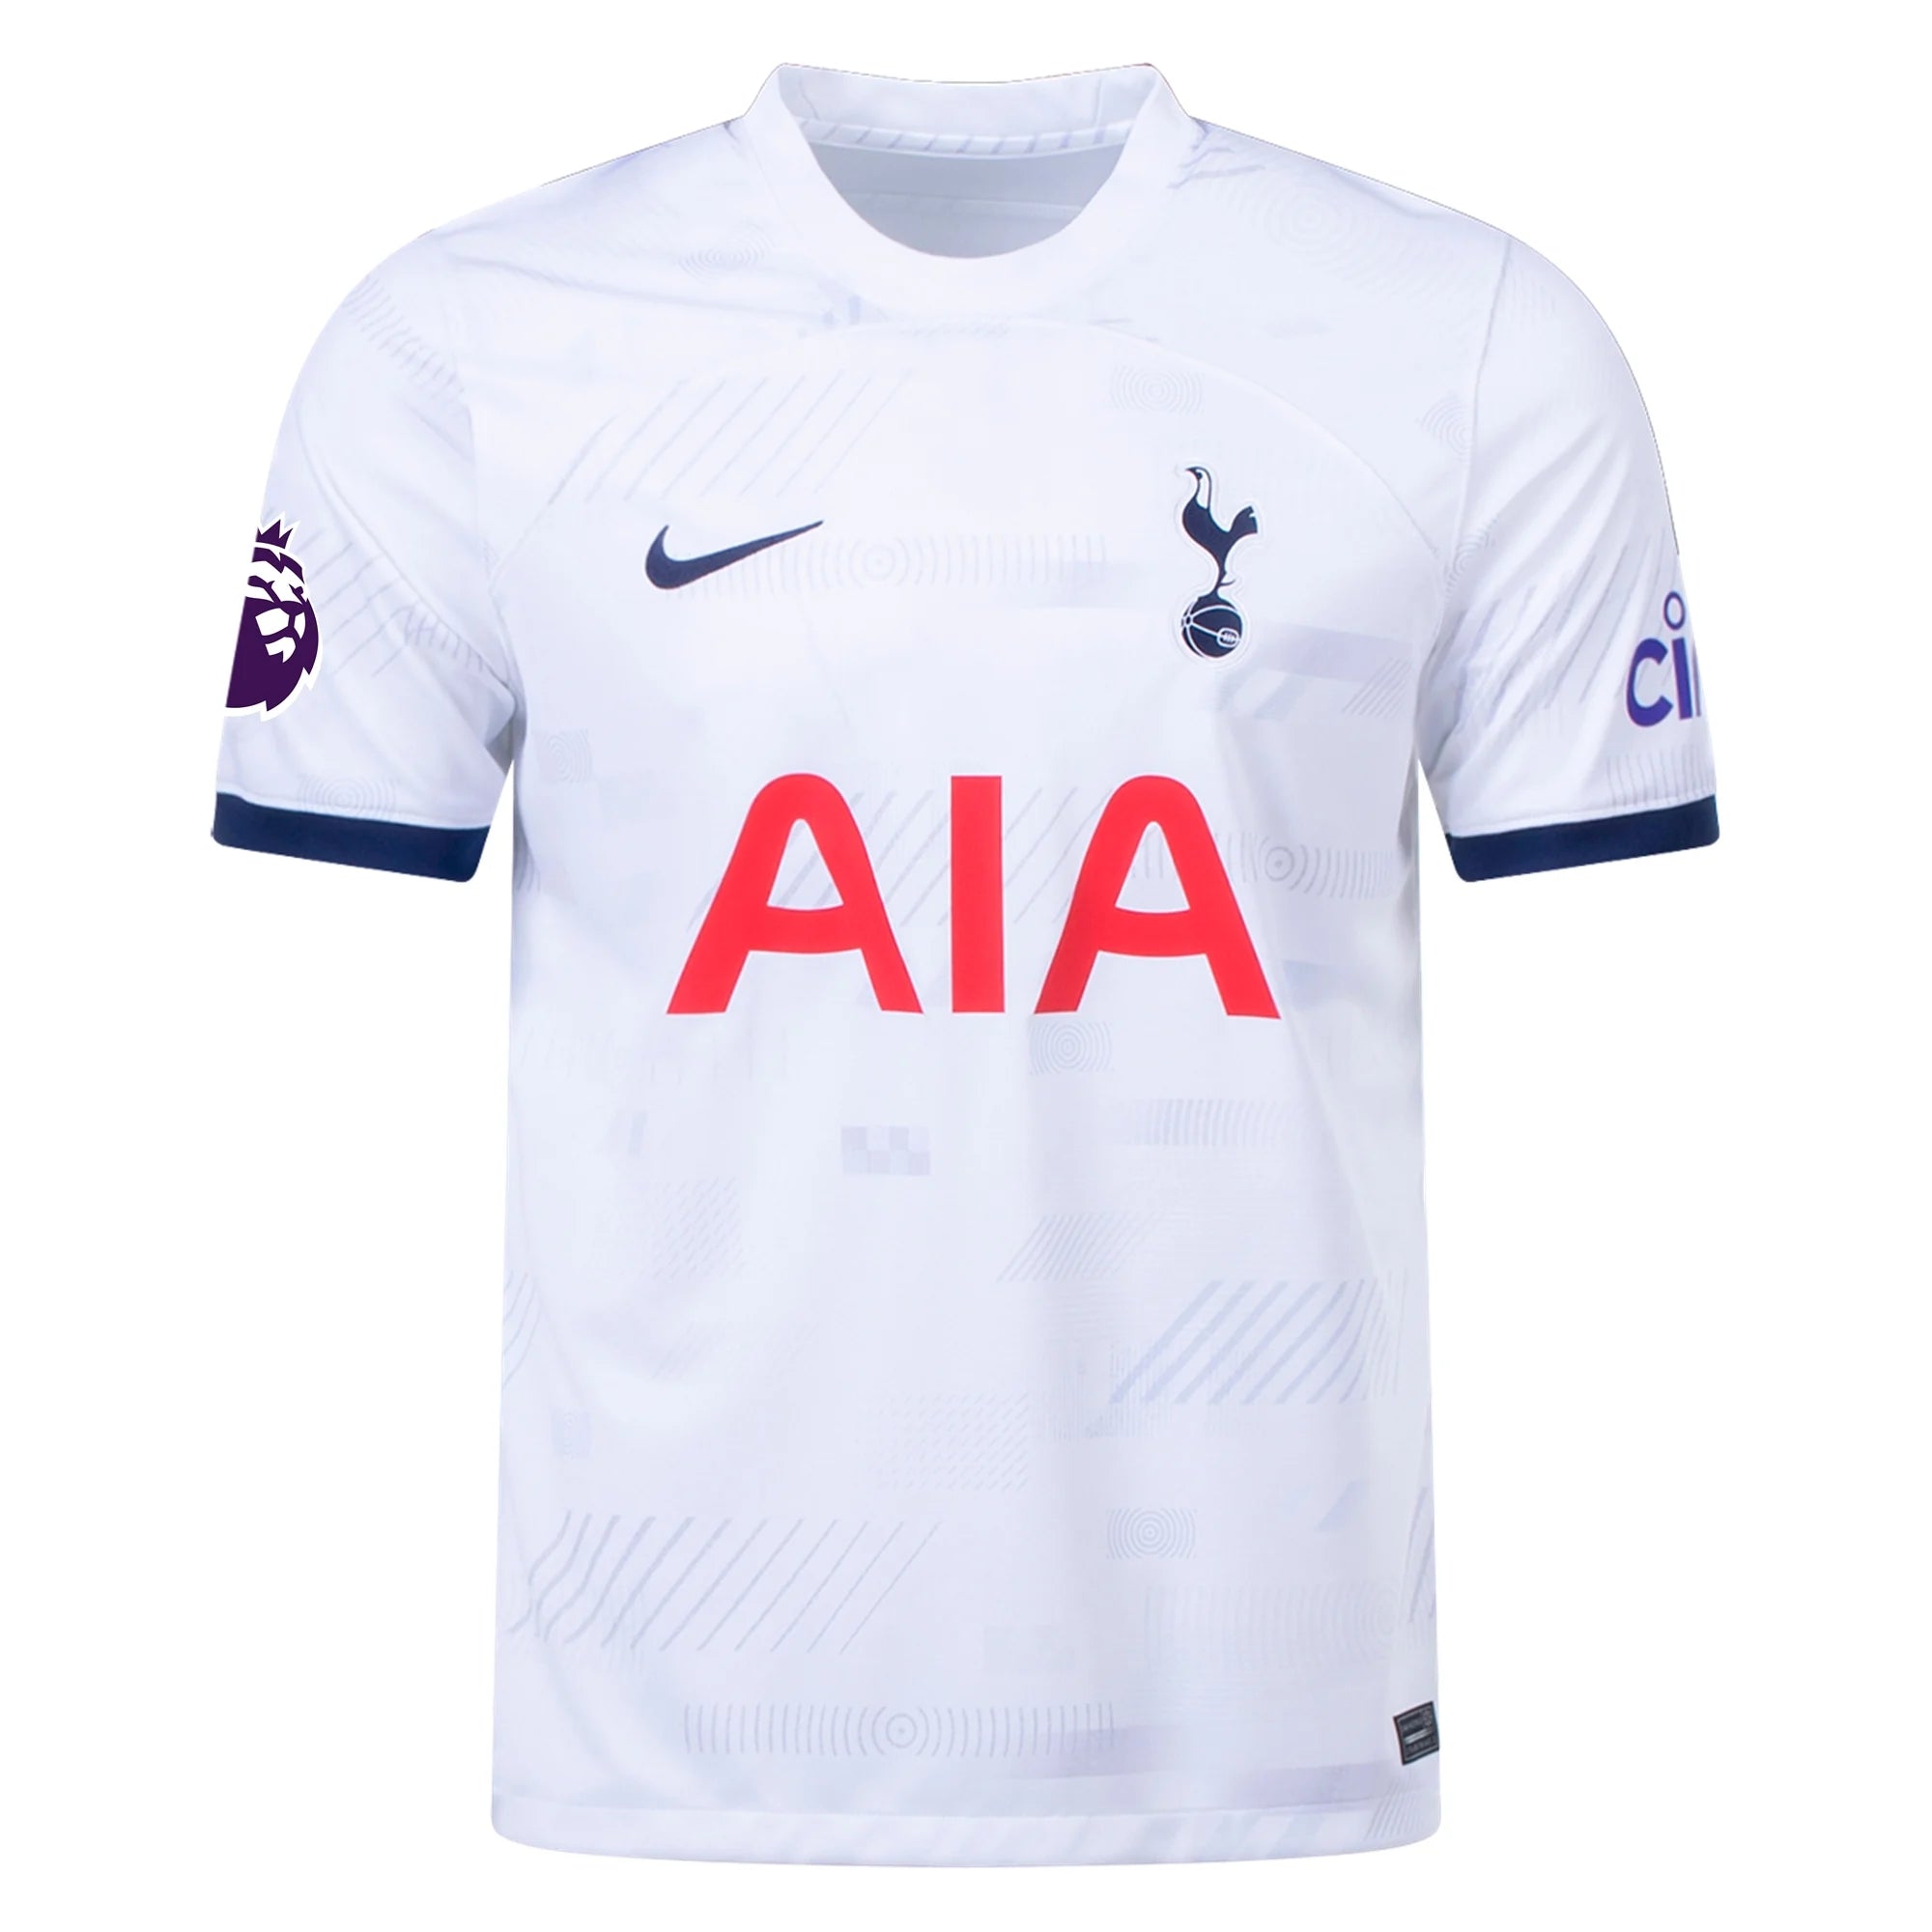 SPURS NEW 2019/20 HOME KIT - OUT NOW! 